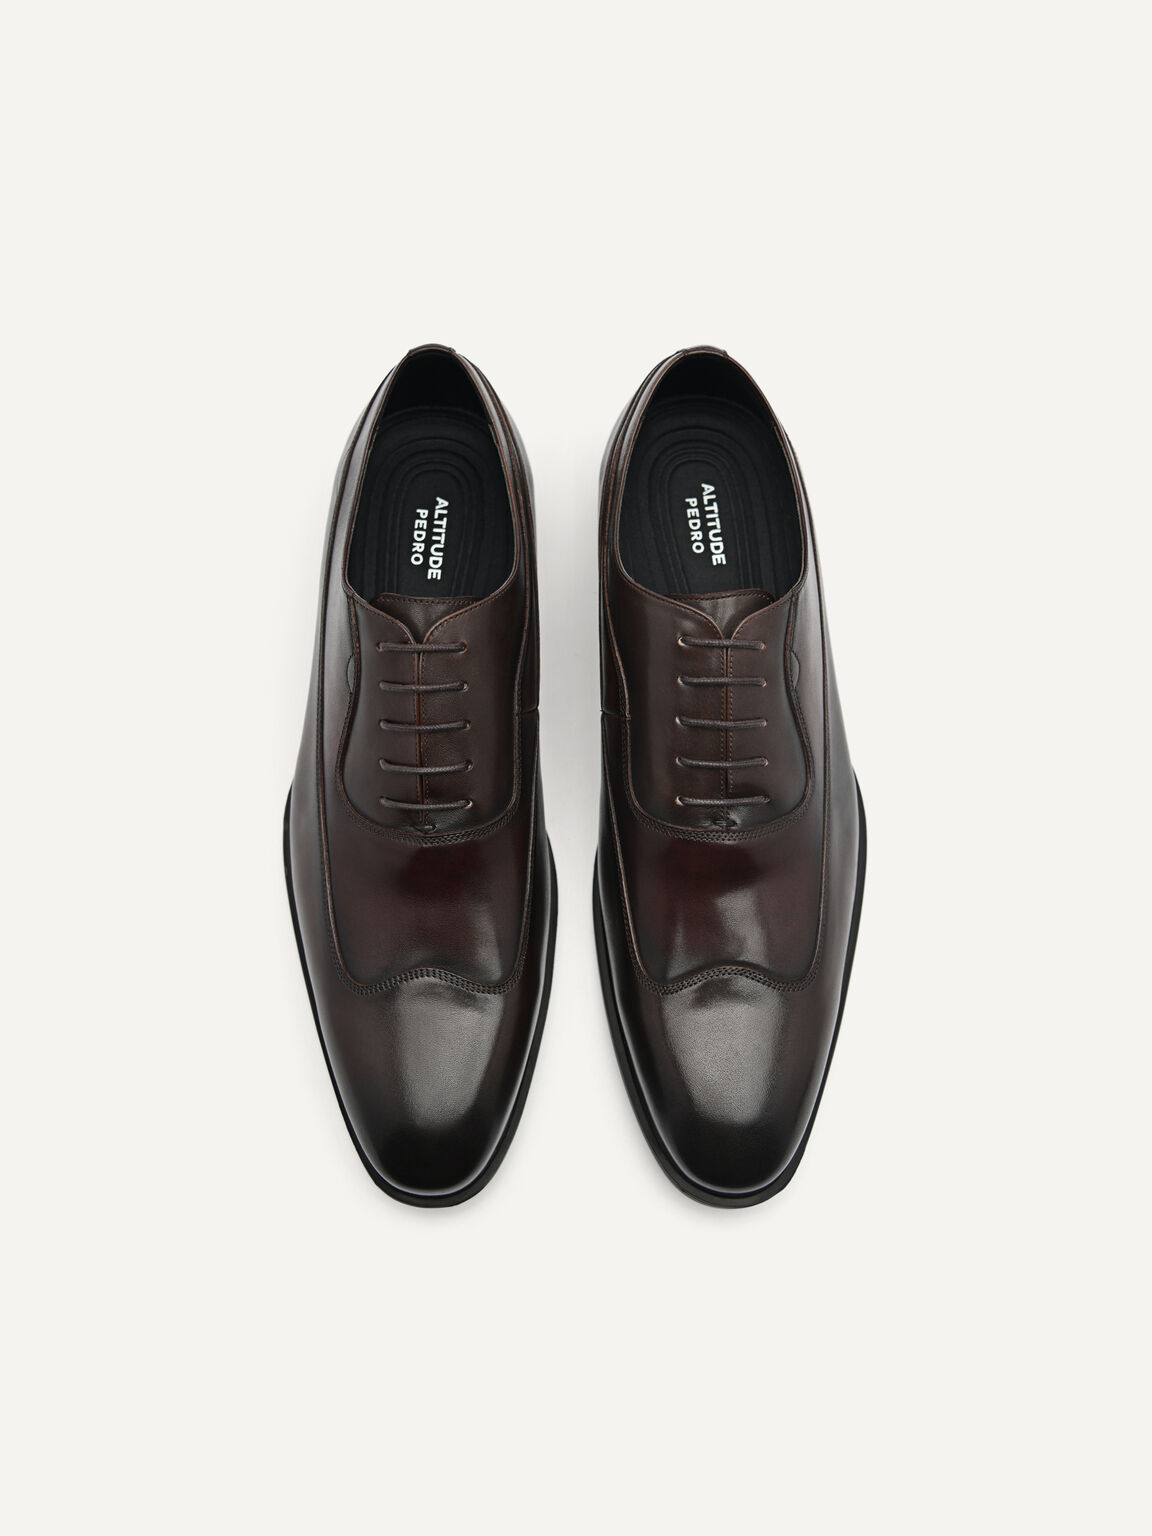 Dylan Leather Oxford Shoes, Dark Brown